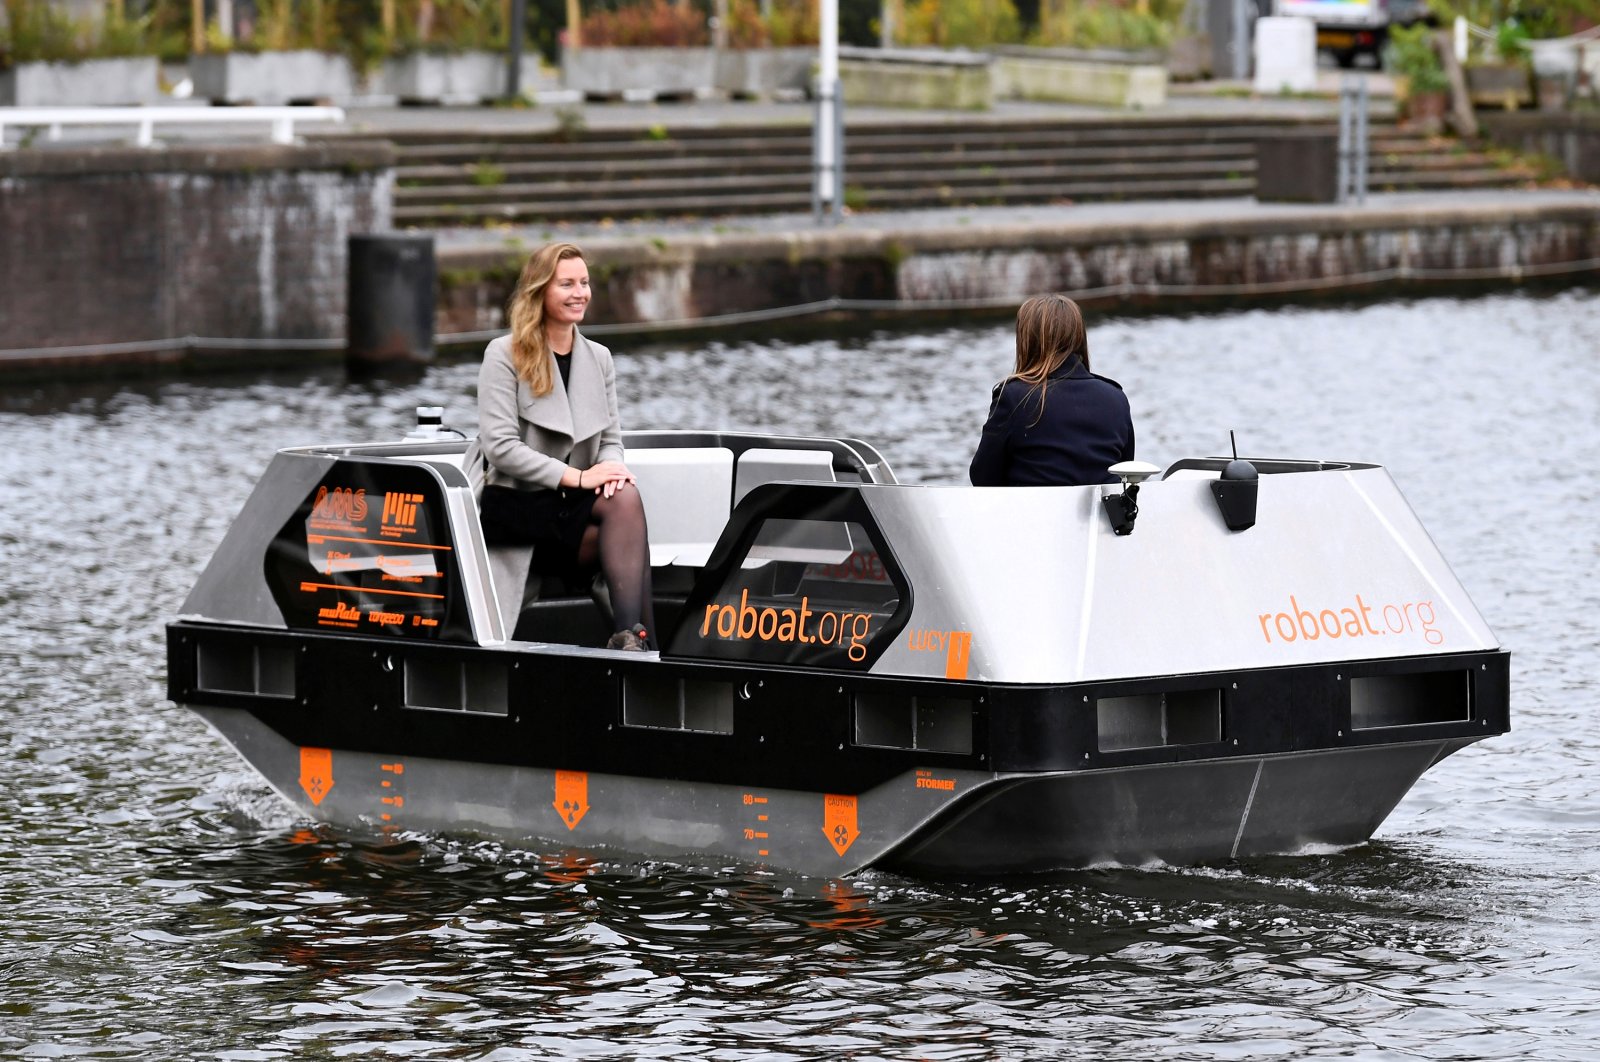 Researchers trial autonomous boats on Amsterdam's waterways in the Netherlands Oct. 27, 2021. (Reuters Photo)